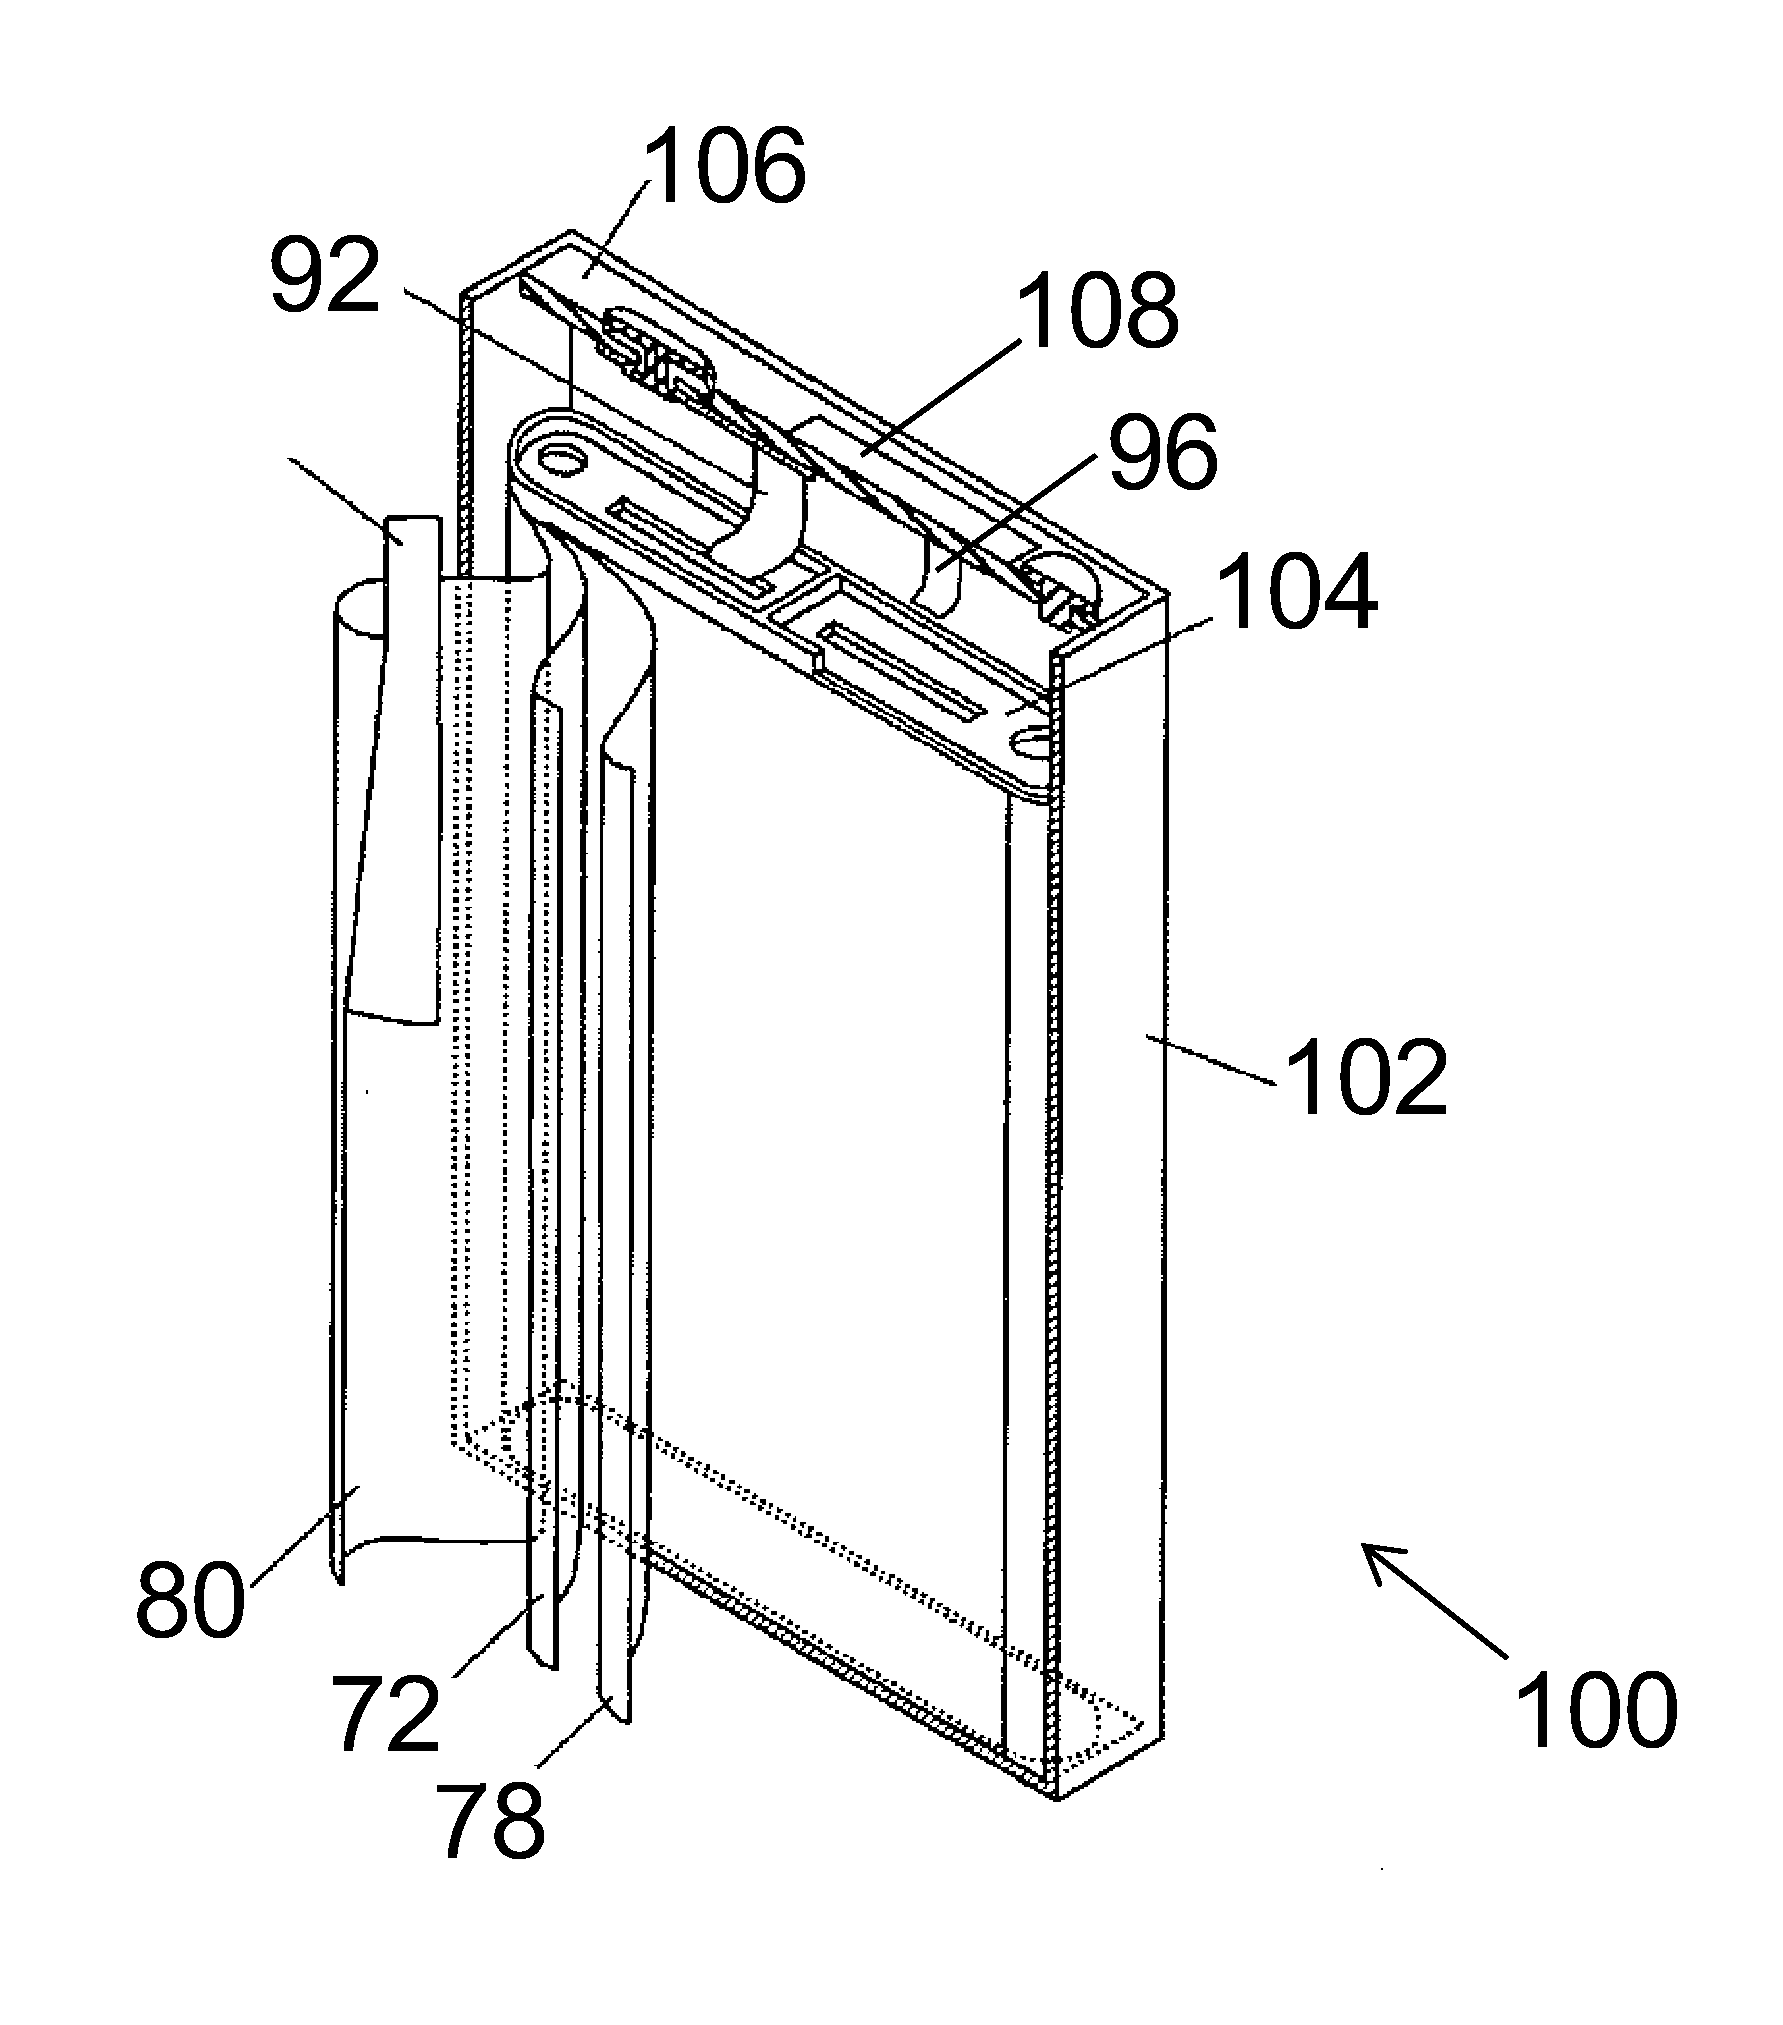 Freestanding, heat resistant microporous film for use in energy storage devices